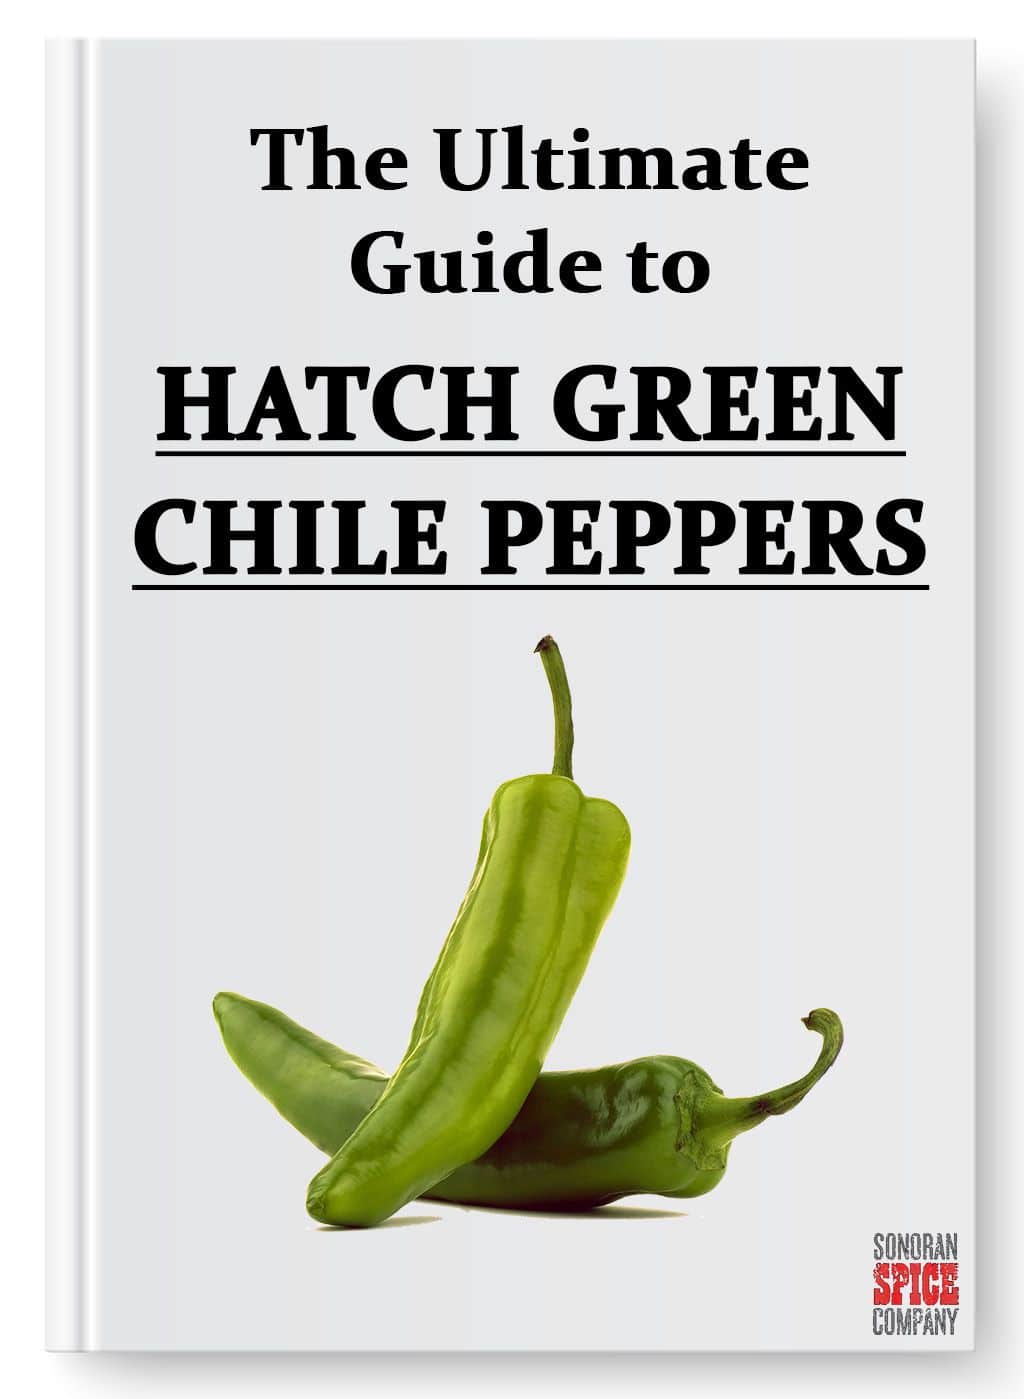 The Ultimate Hatch Green Chile Pepper Guide